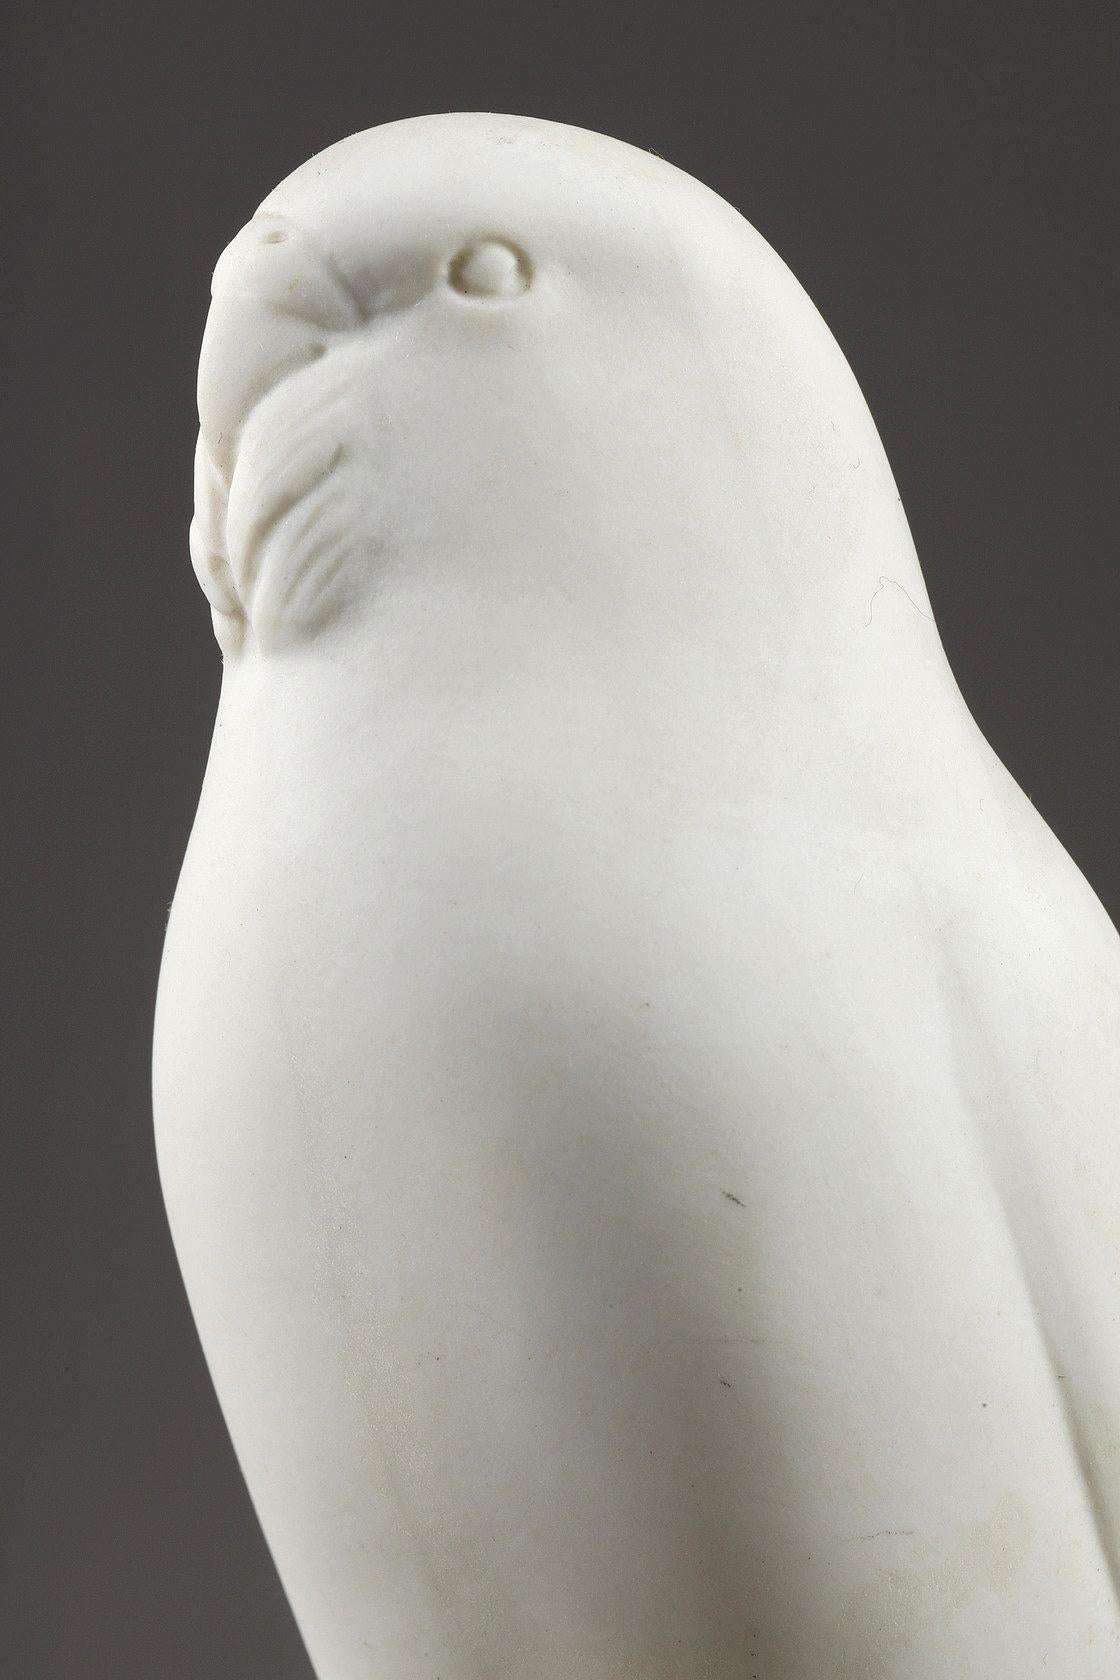 Parrotlet
by Armand PETERSEN (1891-1969) & SEVRES Manufacture

Sculpture in white paste porcelain
Signed « A. Petersen »
Old edition artwork. Stamped by the porcelain manufacture of Sèvres

France
Model created in 1932
Edited by the Sèvres